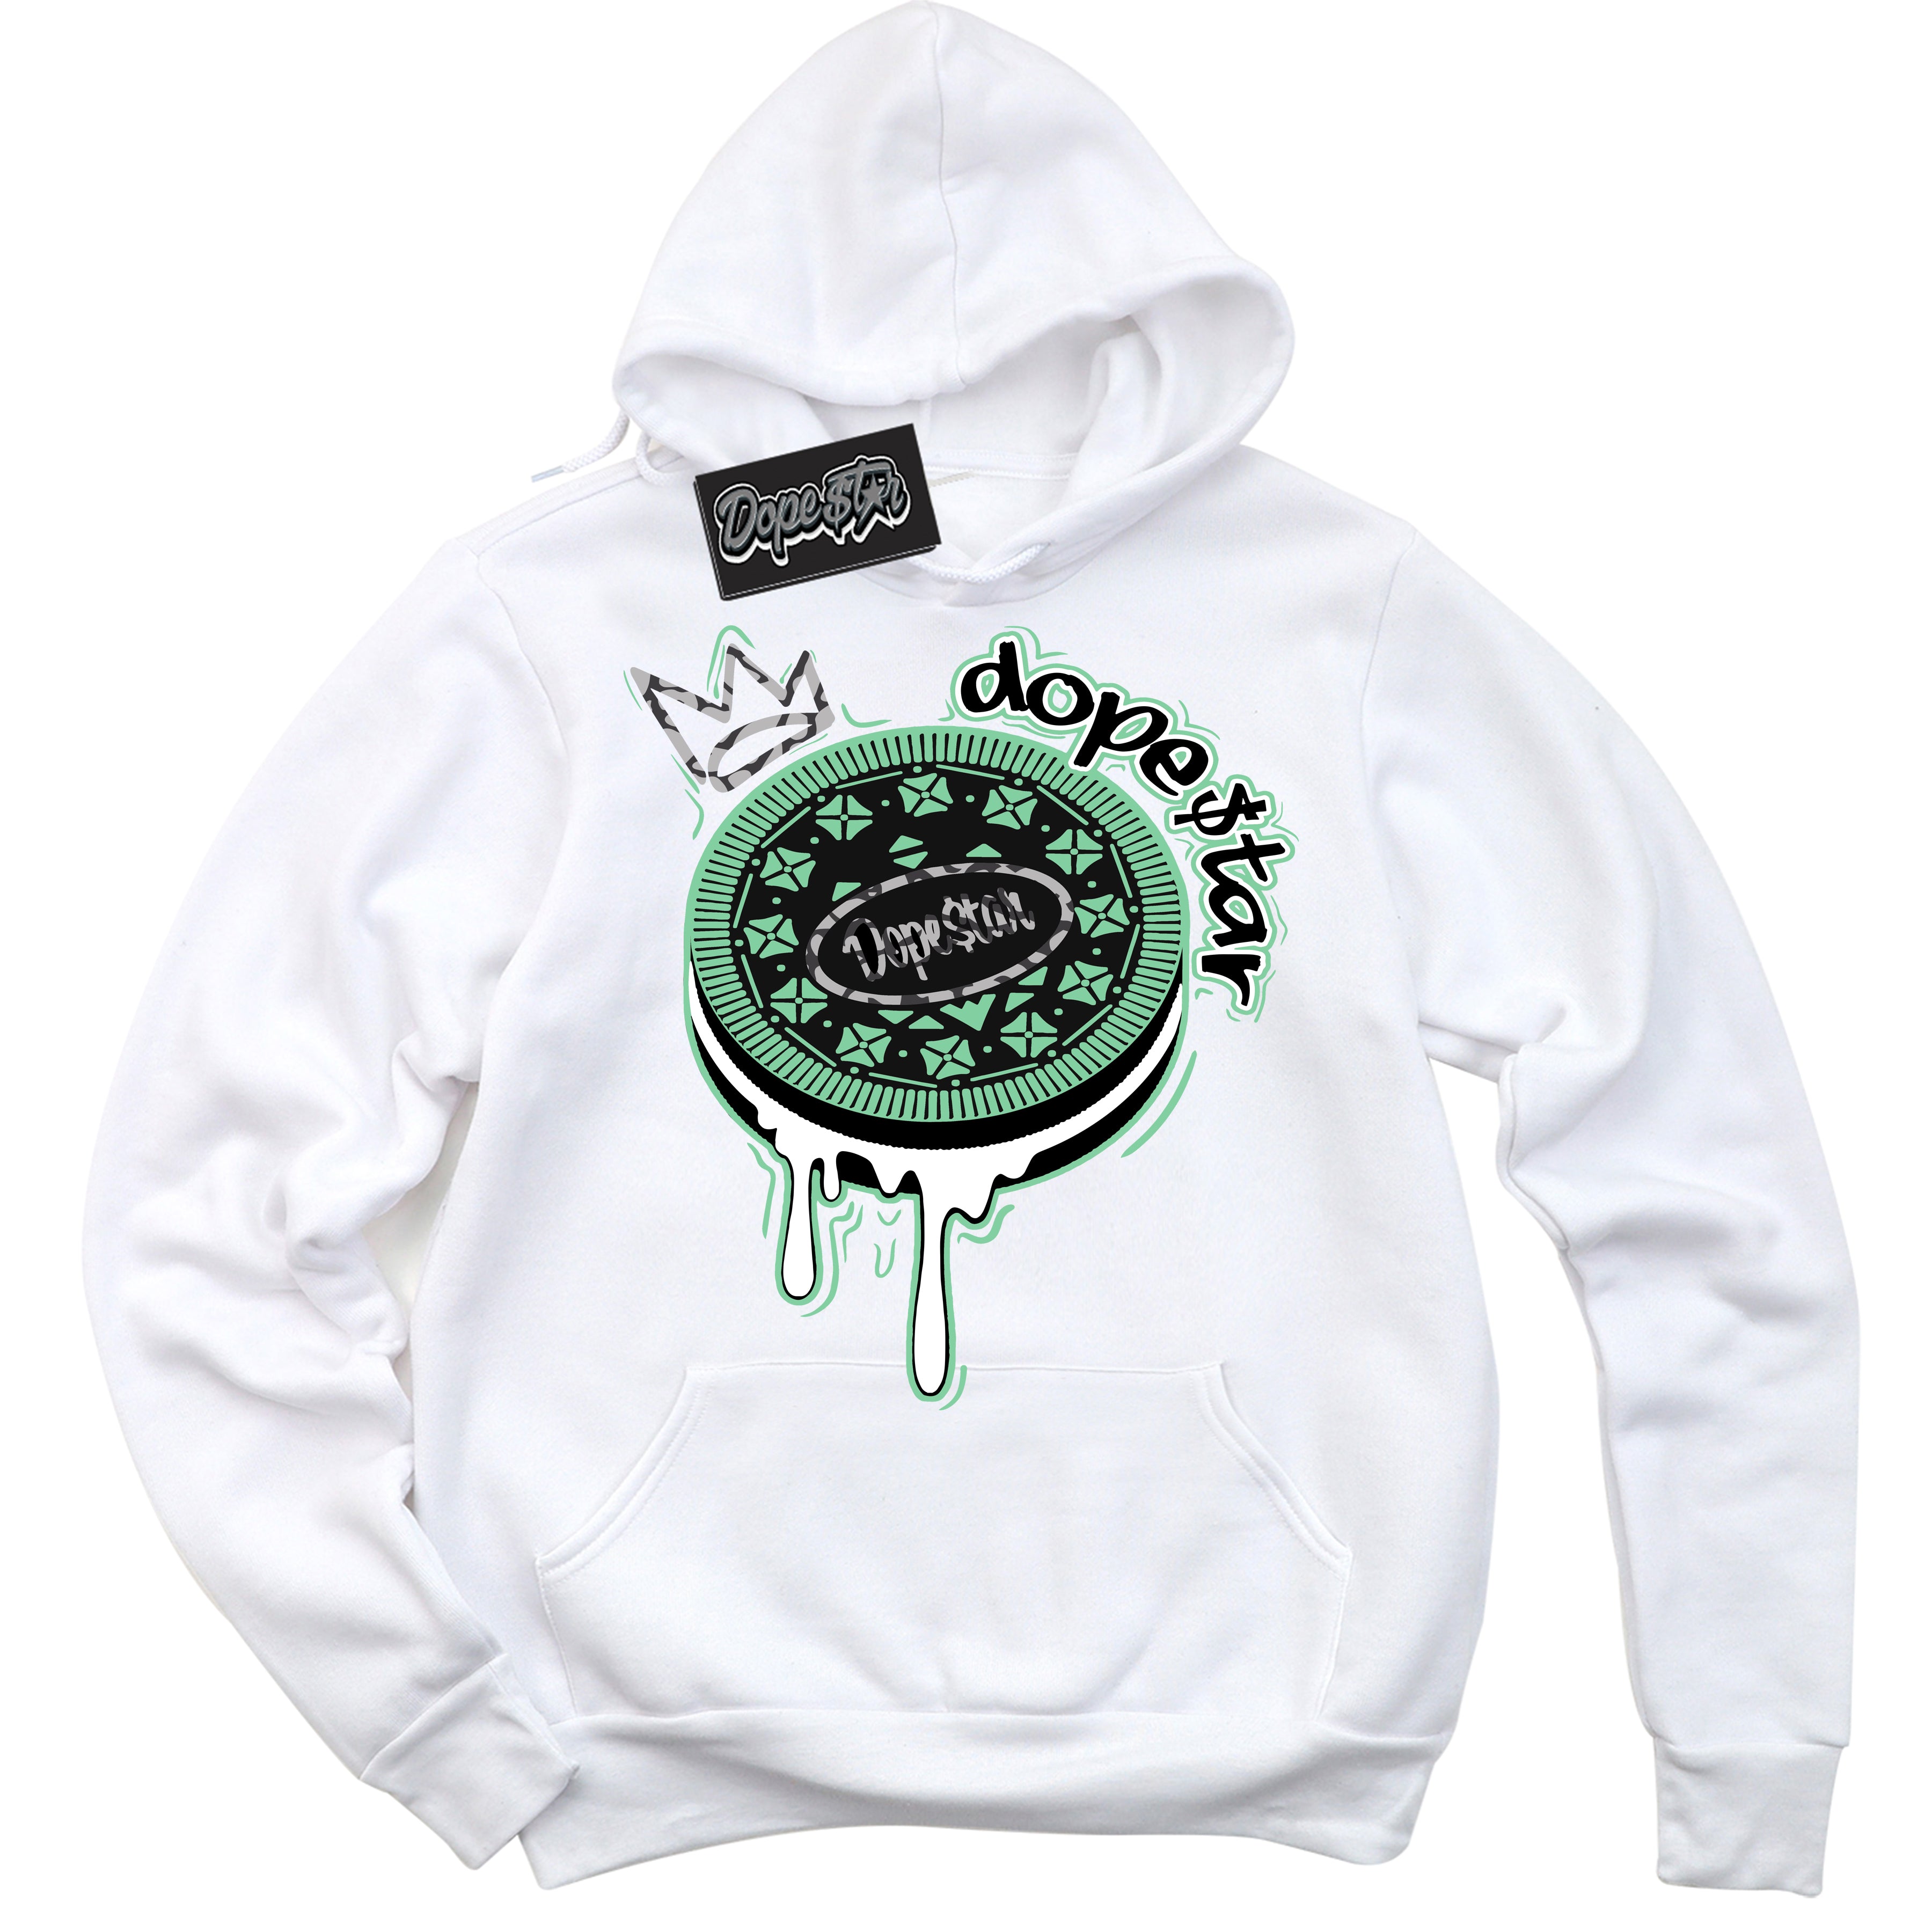 Cool White Graphic DopeStar Hoodie with “ Oreo DS “ print, that perfectly matches Green Glow 3s sneakers